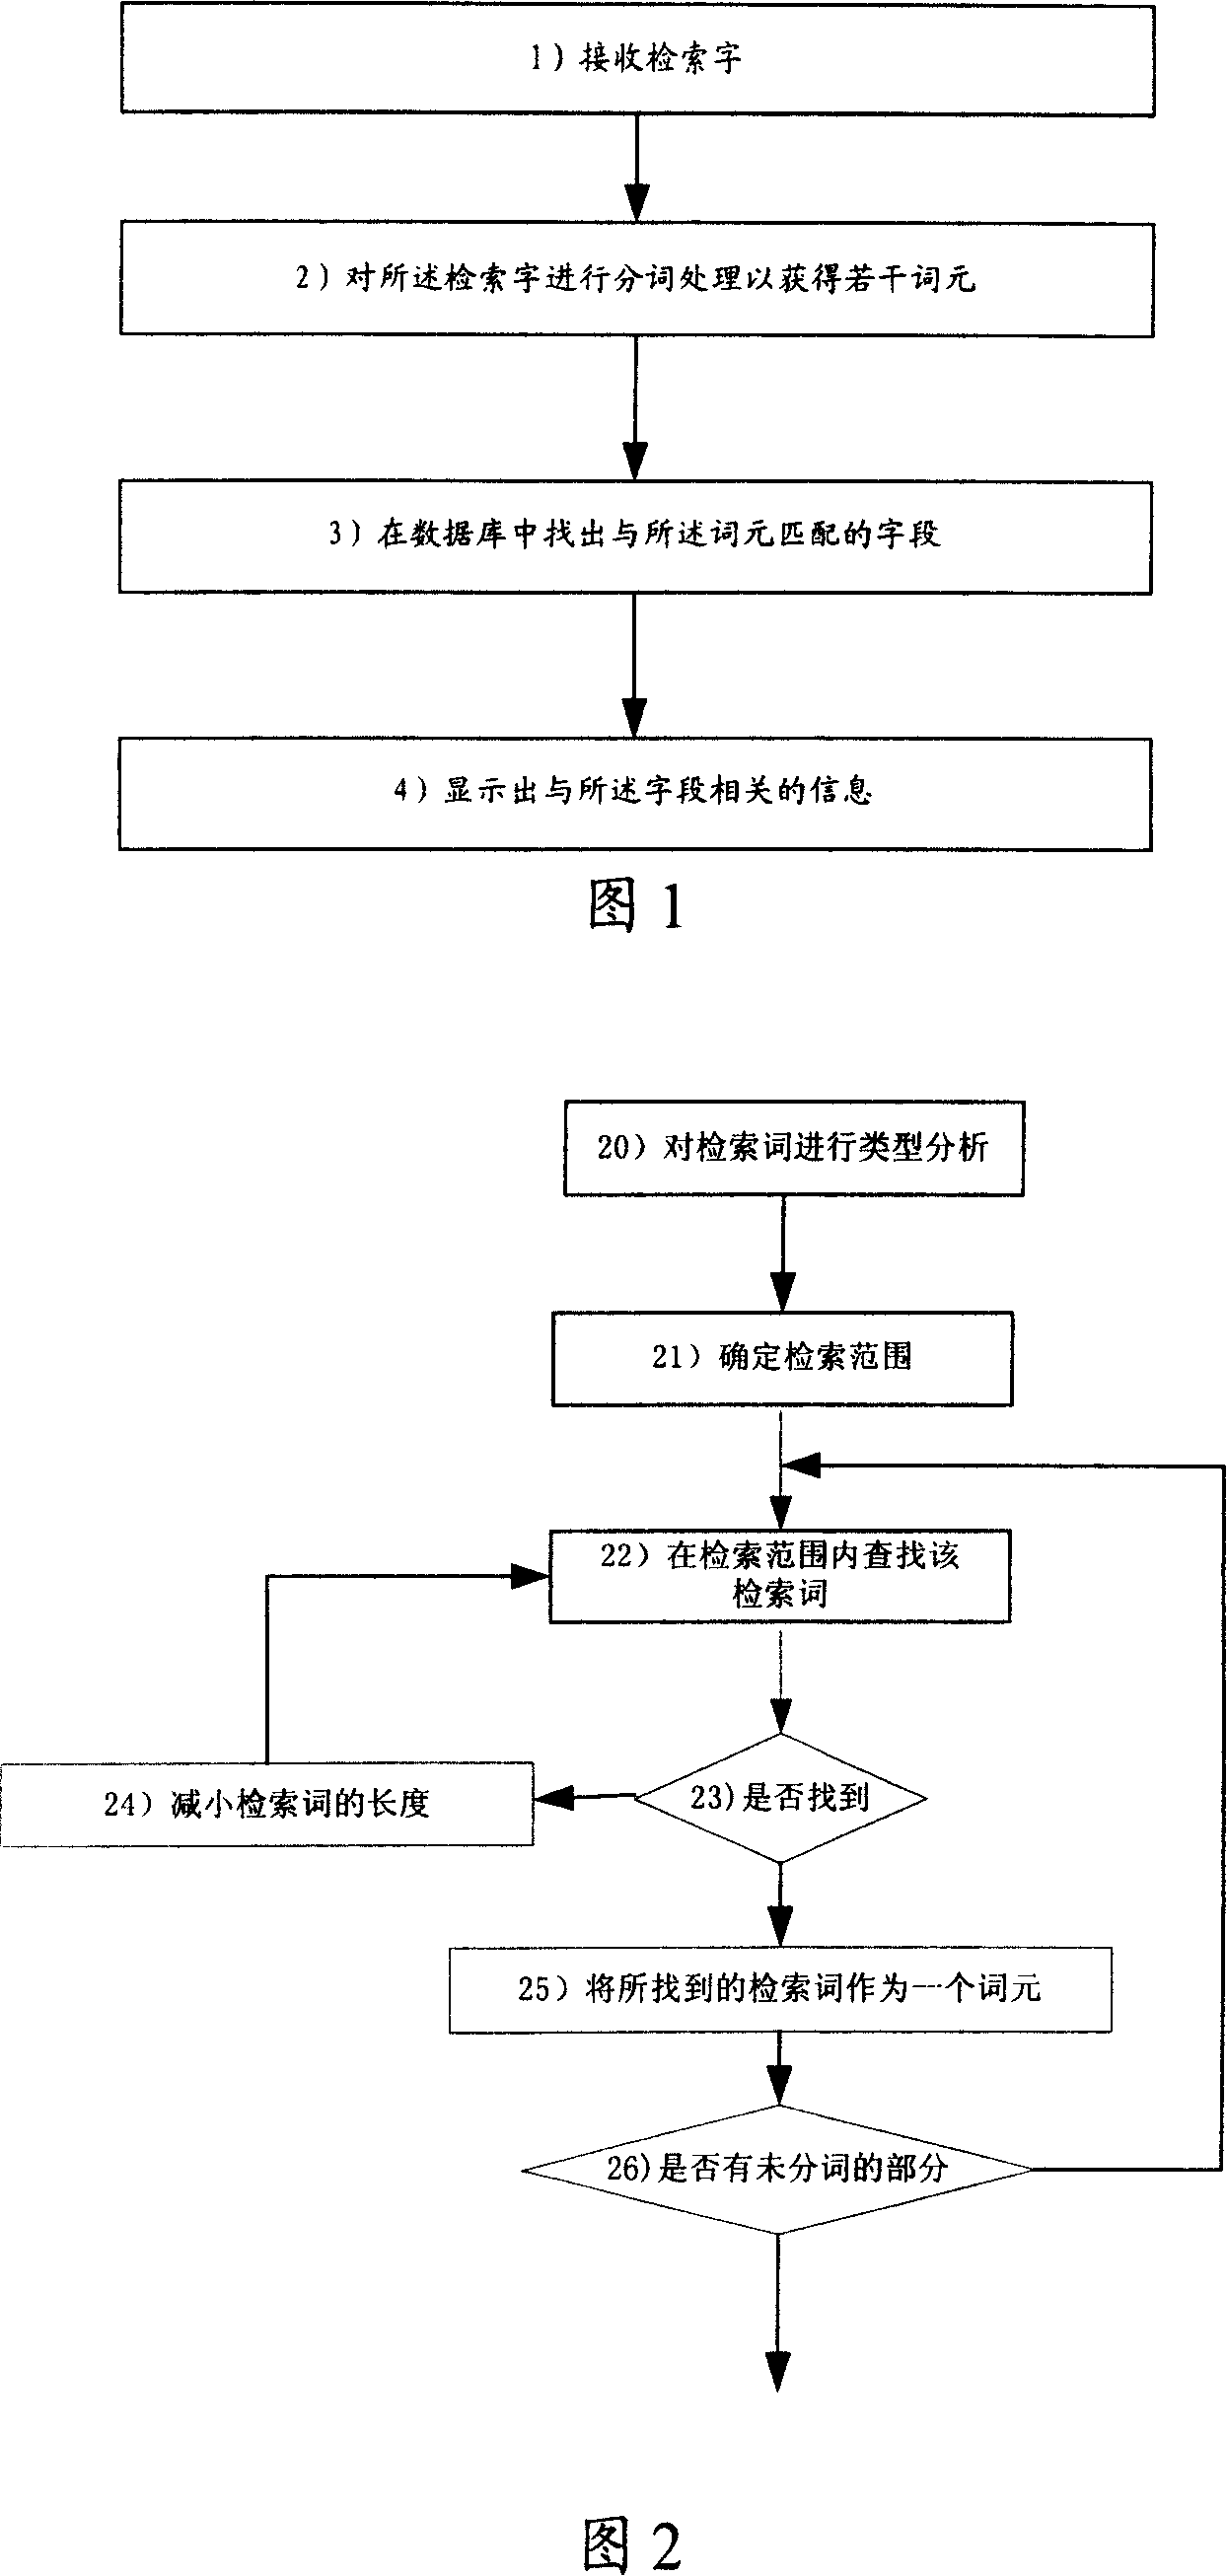 Electronic navigation system information searching method and device thereof